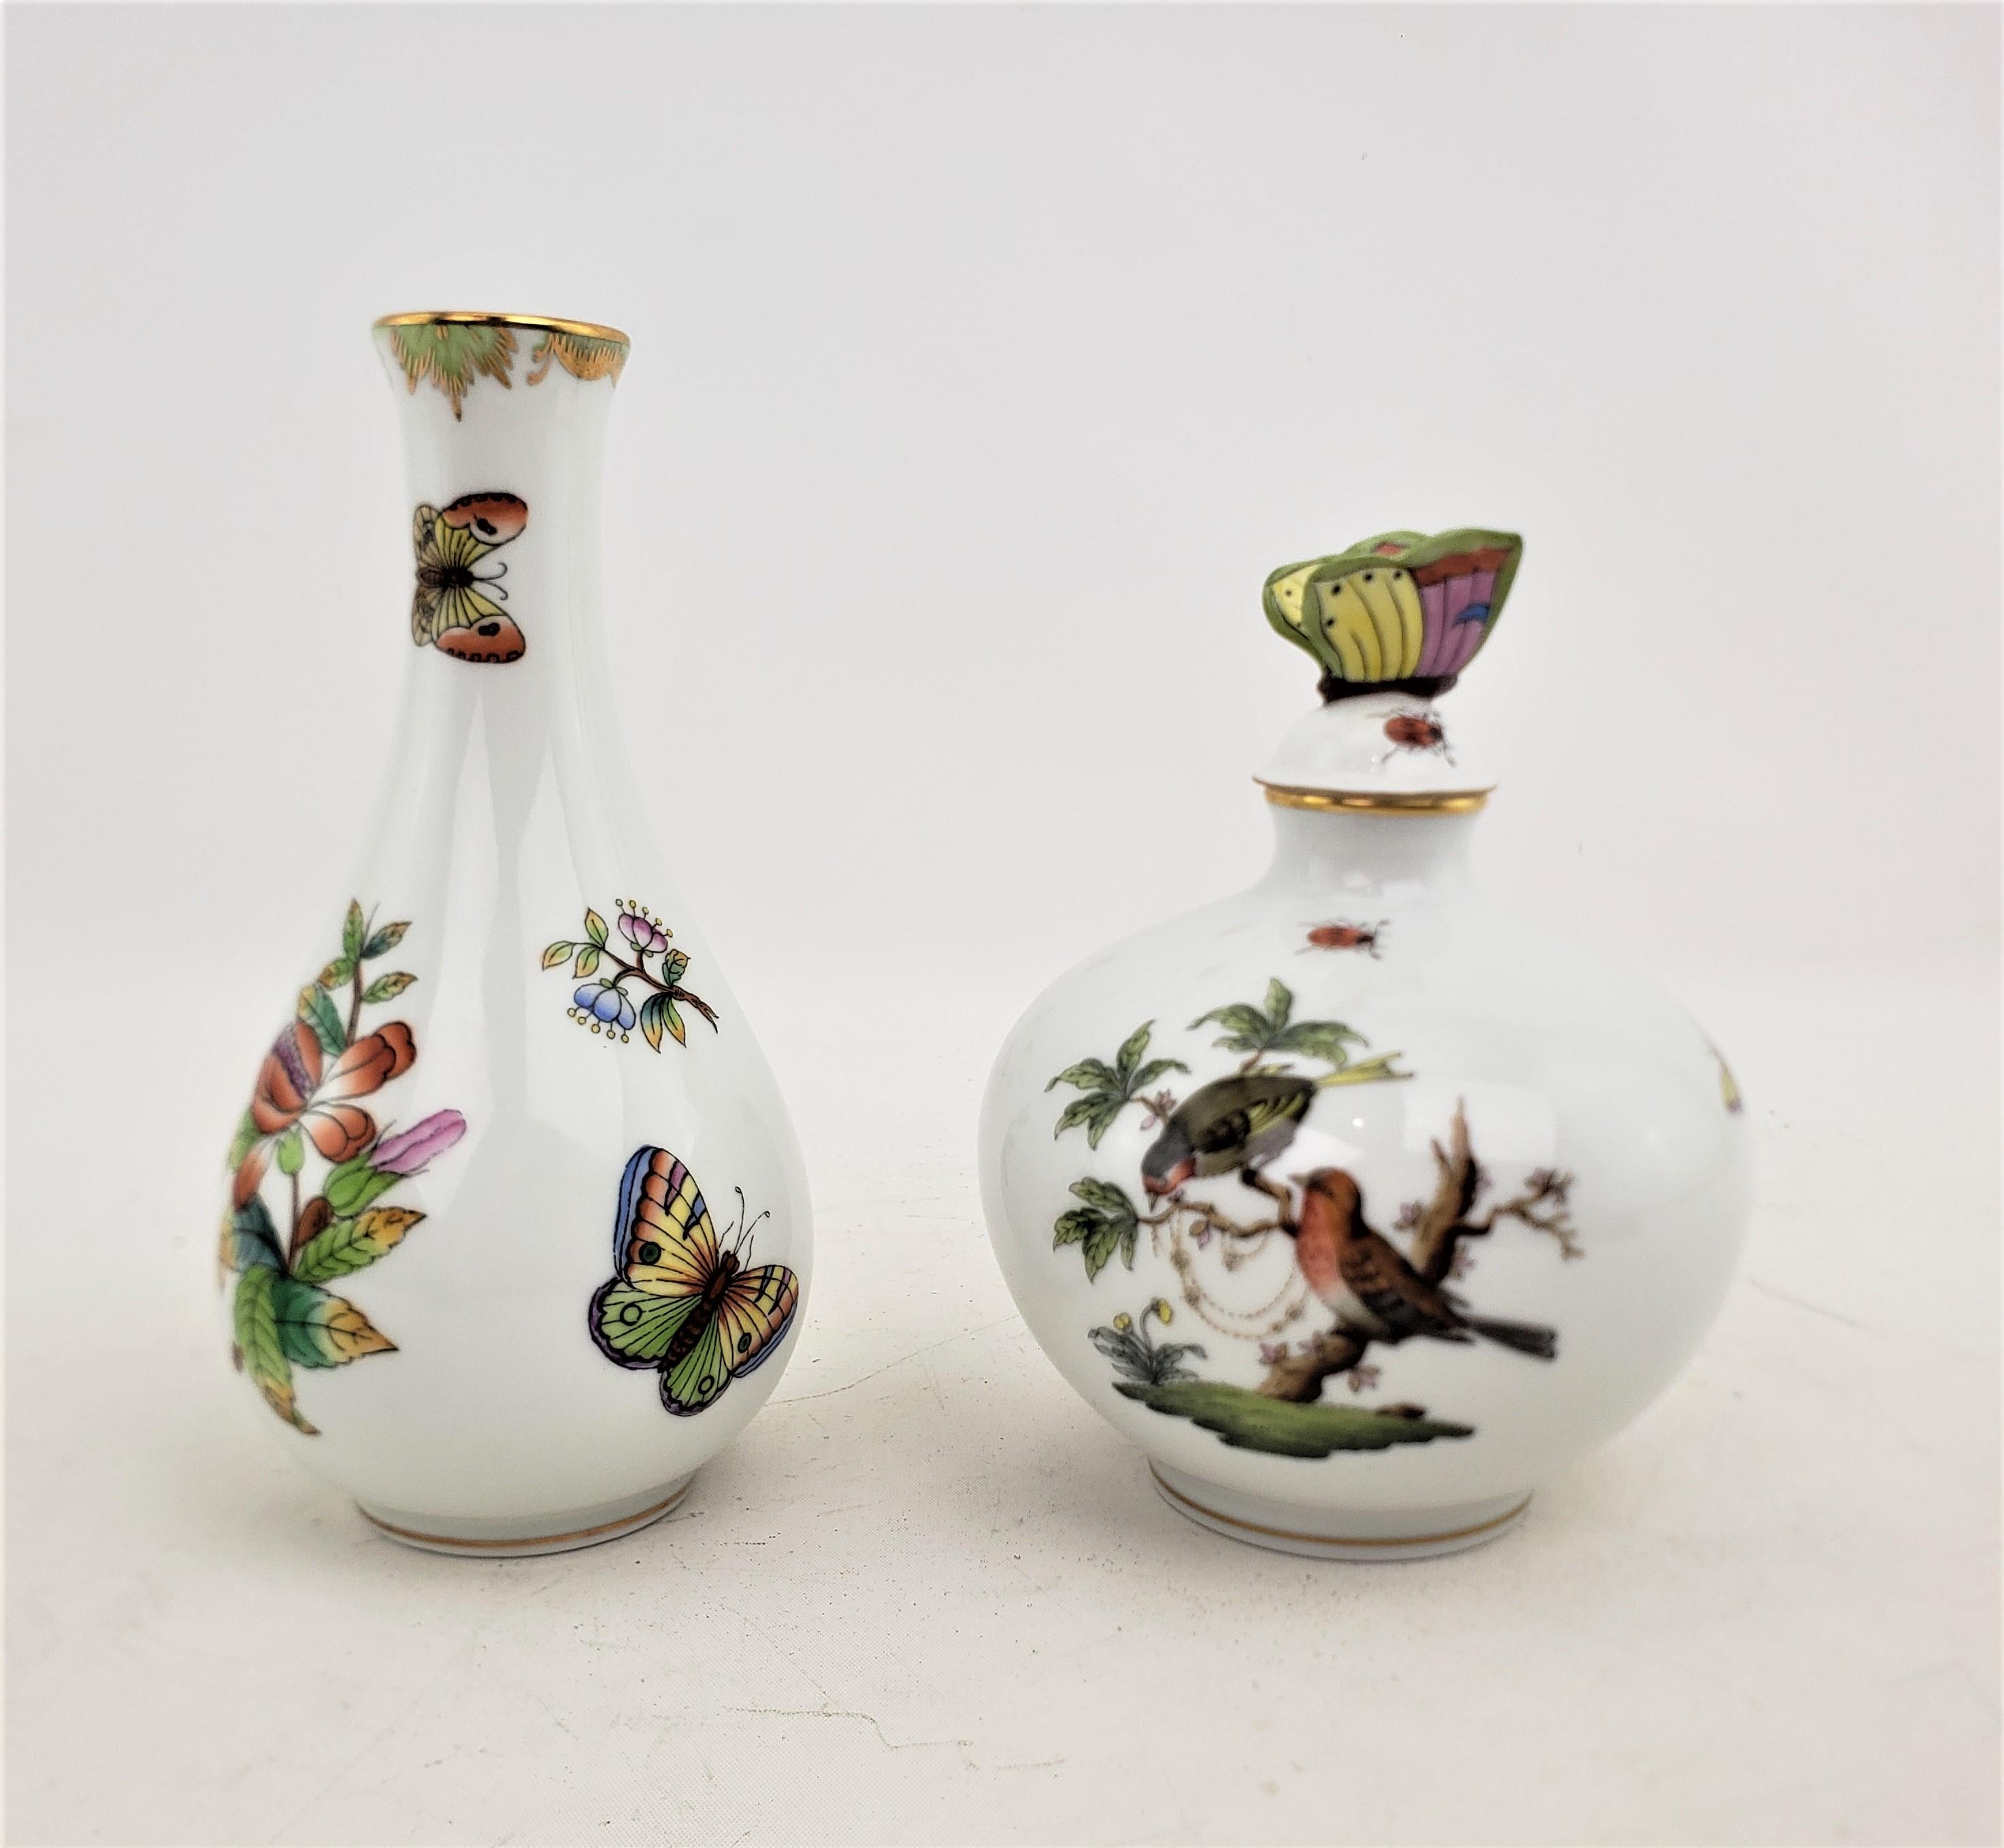 This perfume bottle and vase were both made by the well known Herend factory of Hungary in approximatey 1970 in a Victorian style. The pairing are both composed of porcelain which has been ornately hand painted. The perfume bottle is done in the